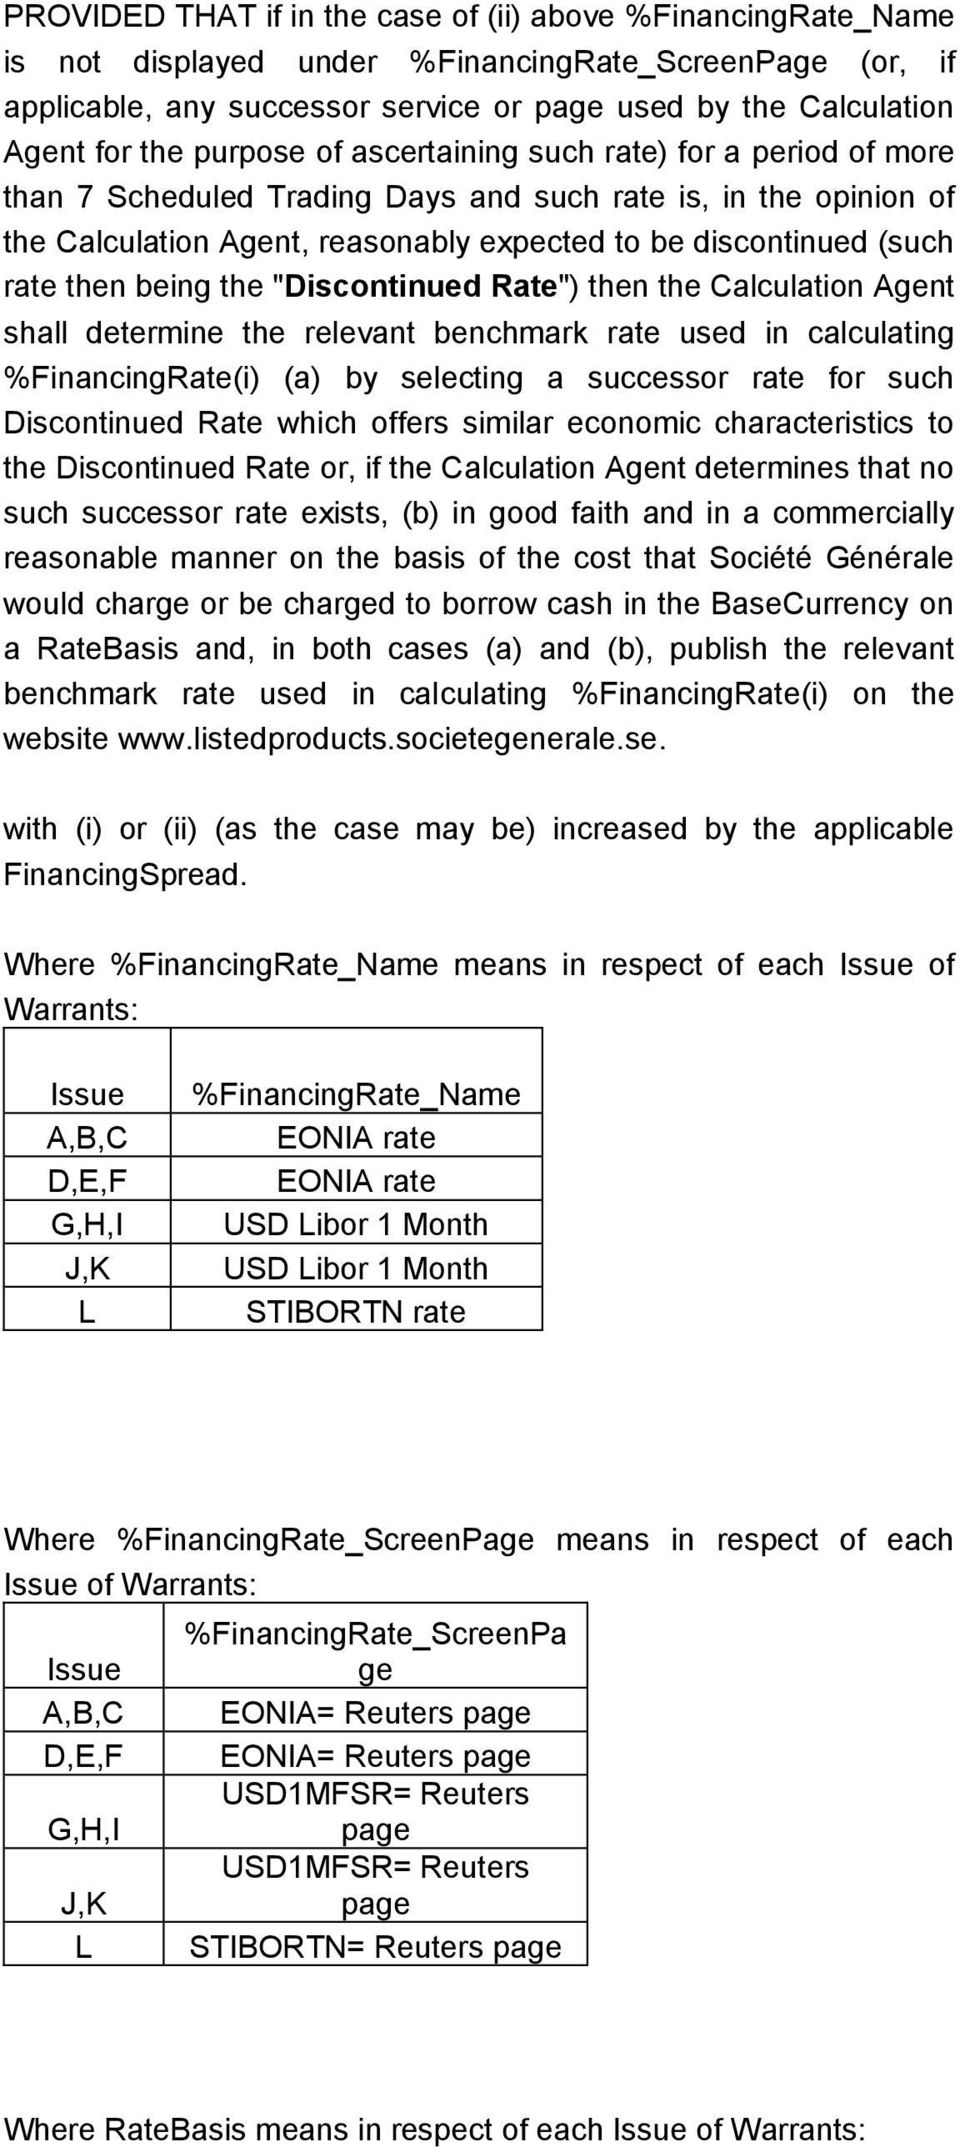 being the "Discontinued Rate") then the Calculation Agent shall determine the relevant benchmark rate used in calculating %FinancingRate(i) (a) by selecting a successor rate for such Discontinued